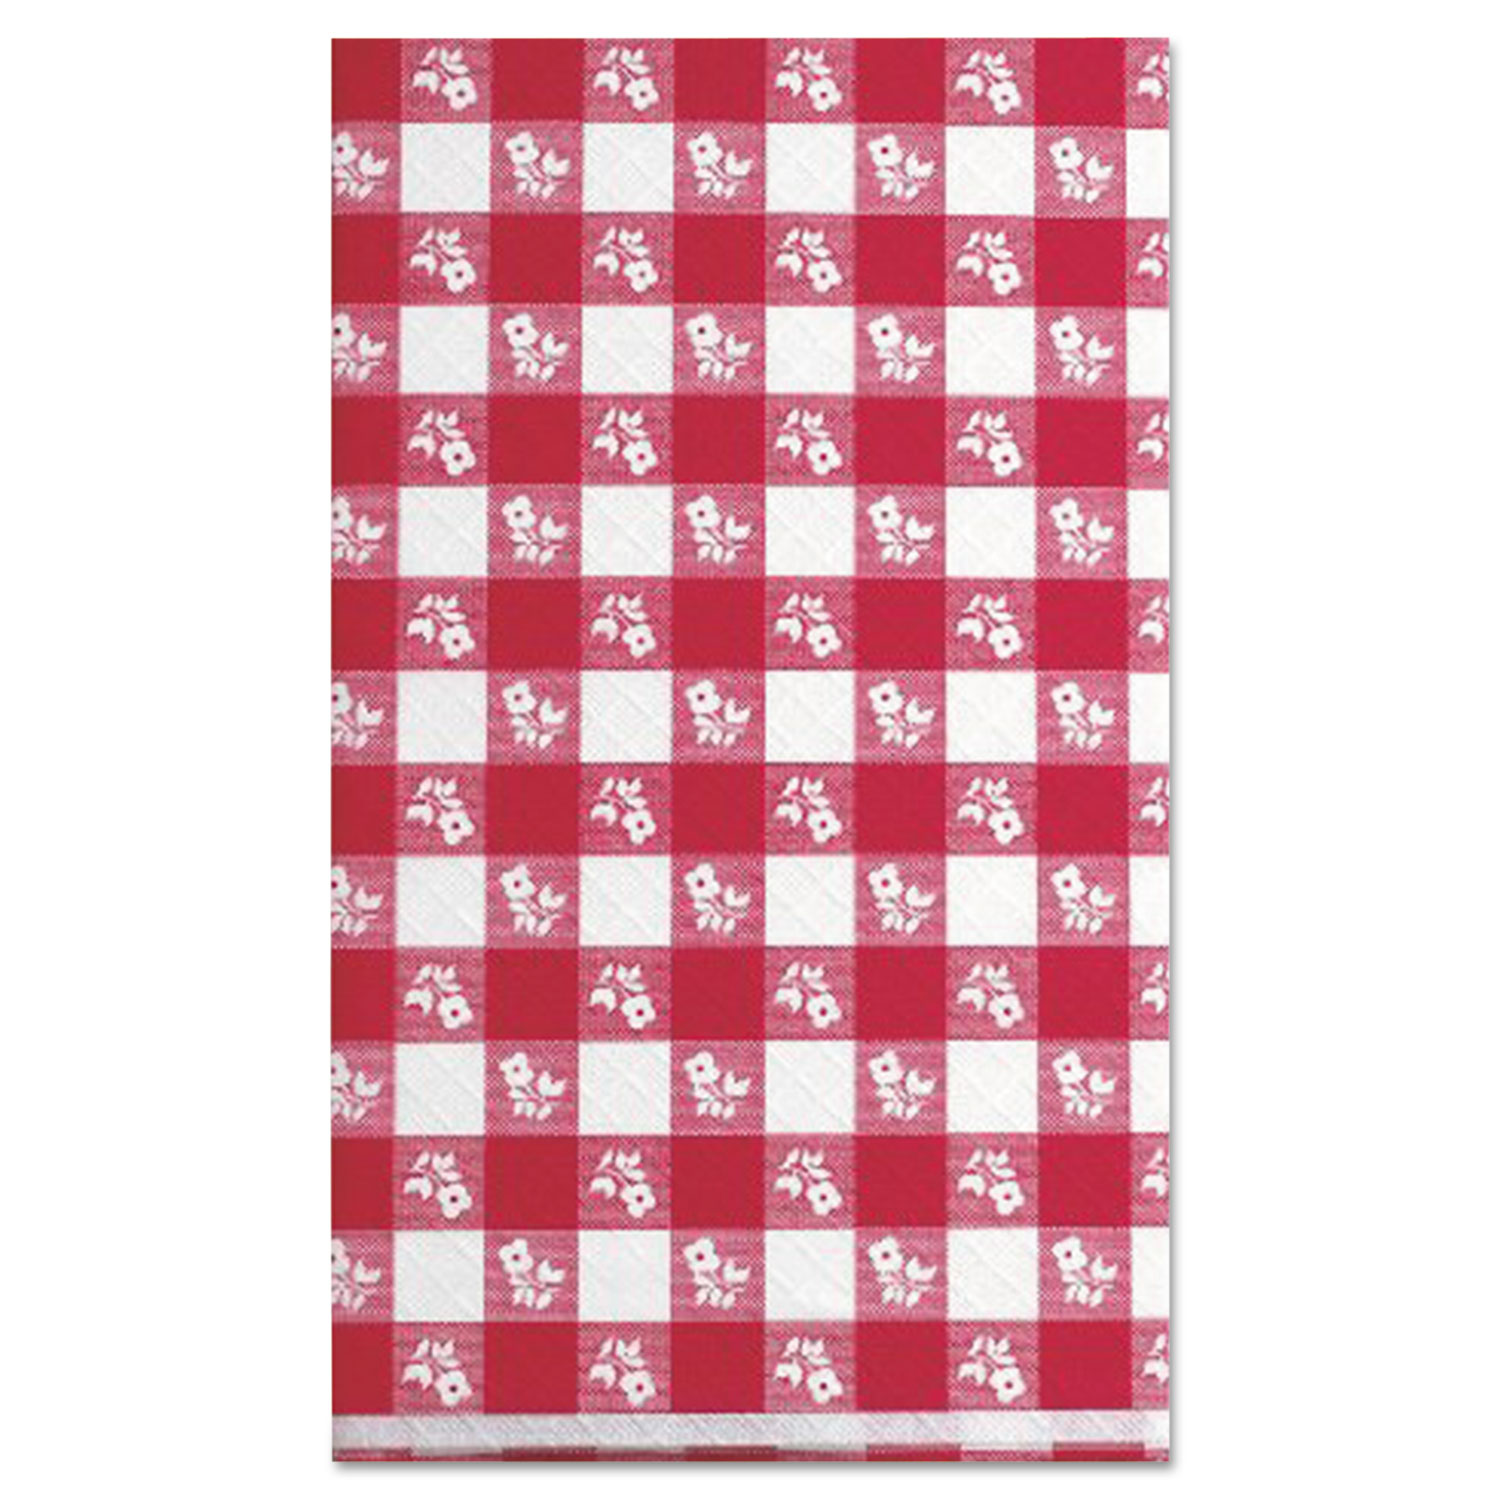  Kurly Kate LRP 91-0105 Paper Table Cover, 40 x 300ft, Red Gingham (LRP910105) 